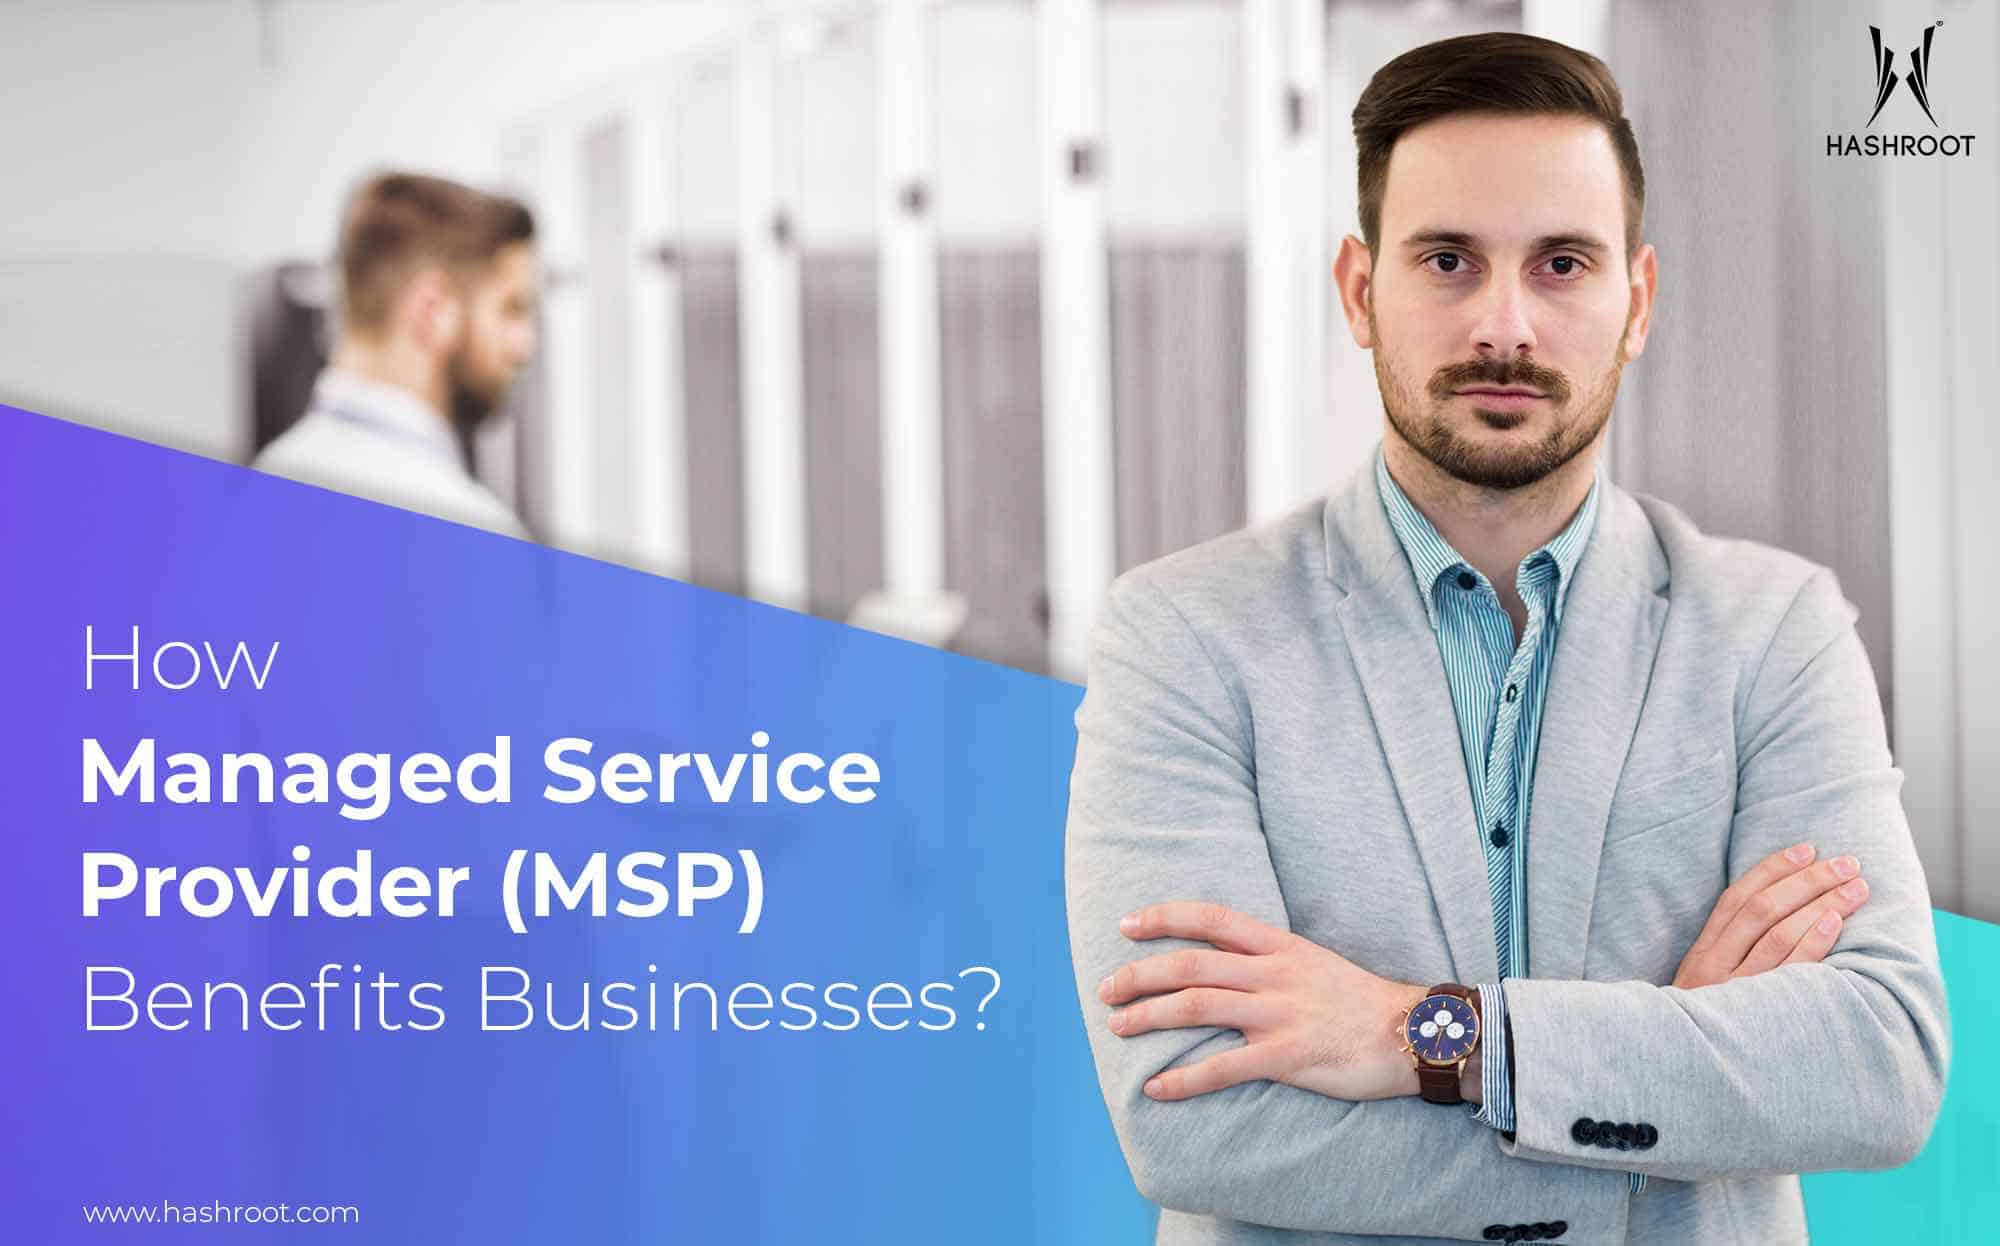 How Managed Service Provider (MSP) Benefits Businesses?